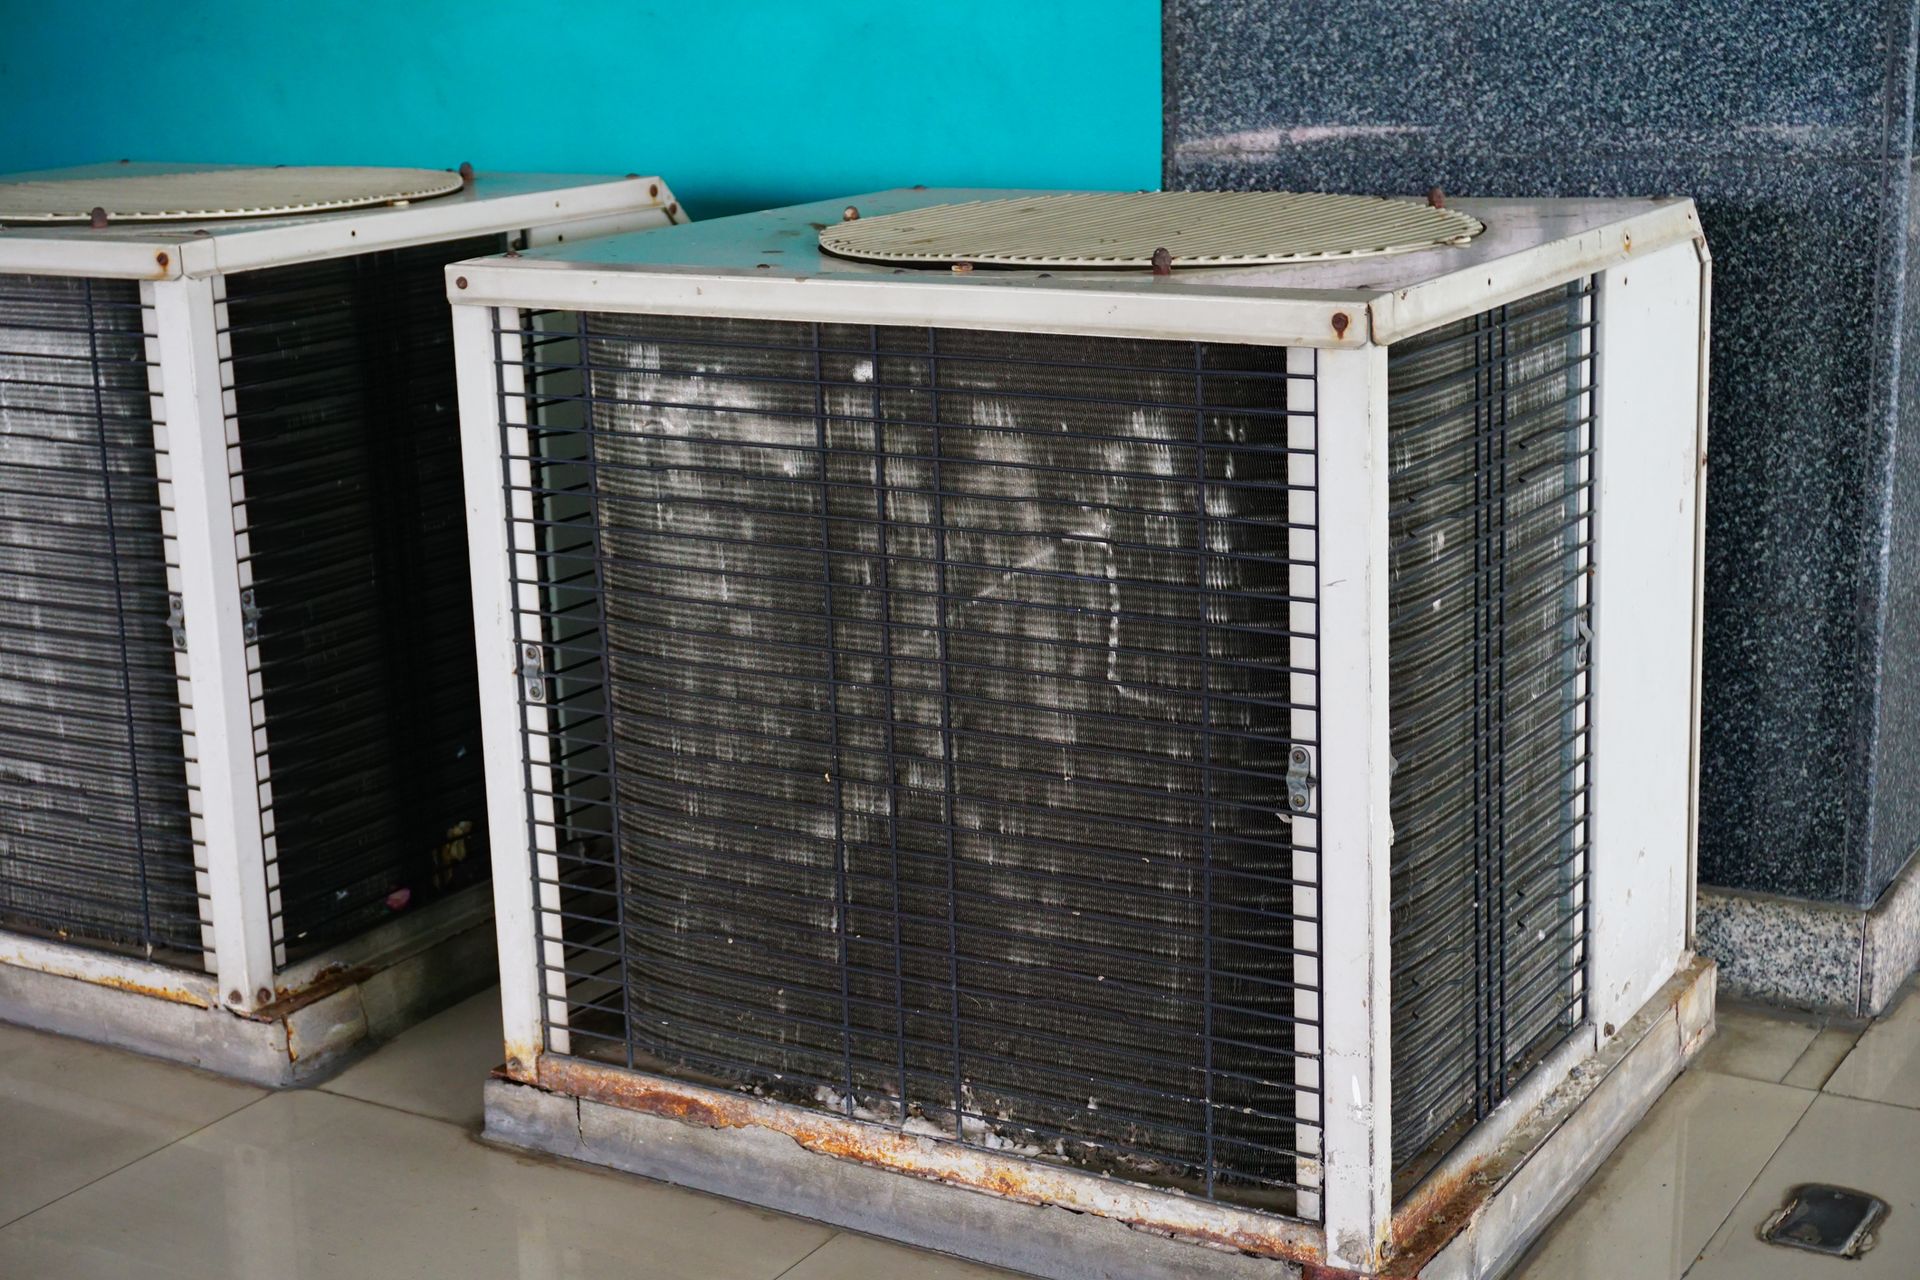 Two old air conditioners are sitting next to each other on the floor.